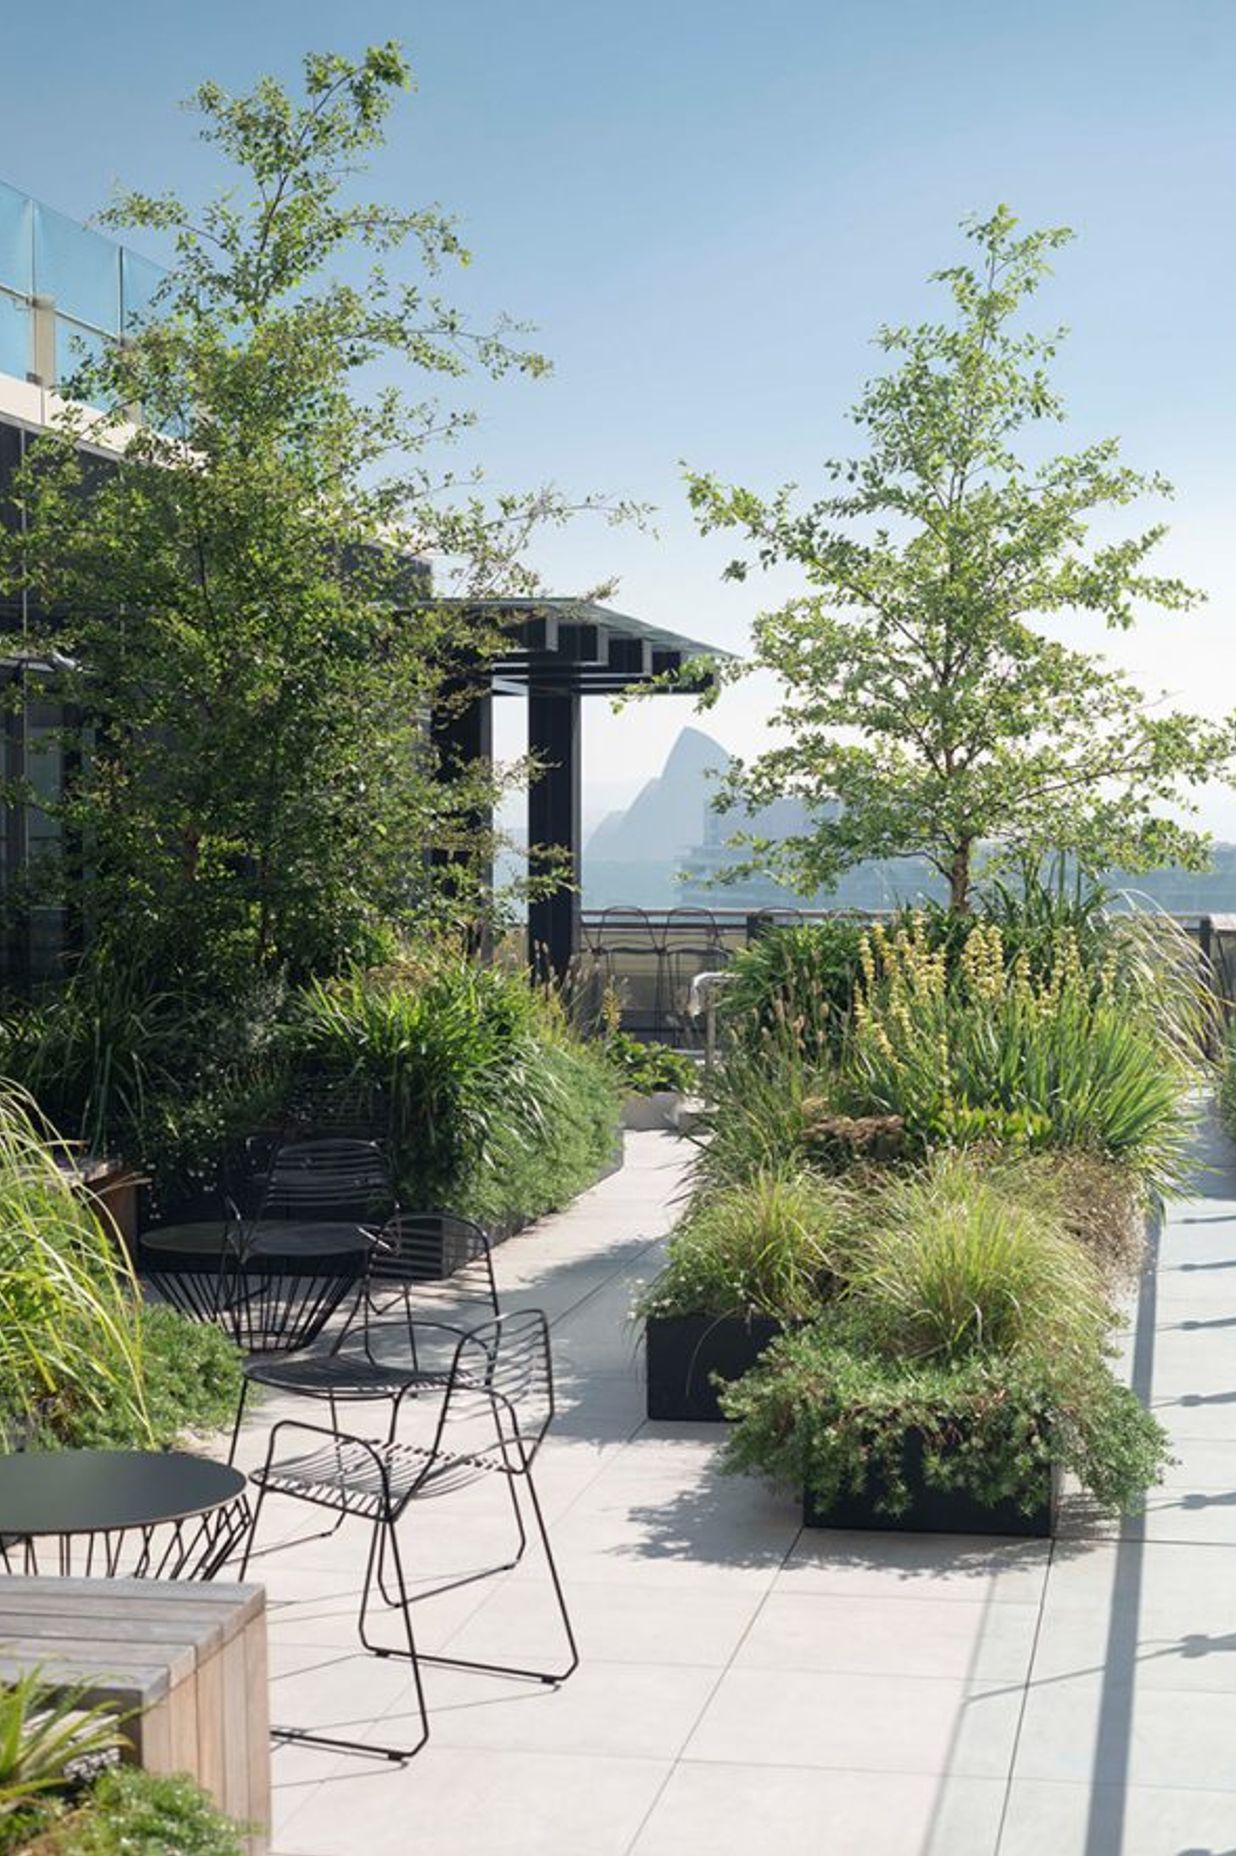 Raising the roof – The beauty and benefits of rooftop gardens